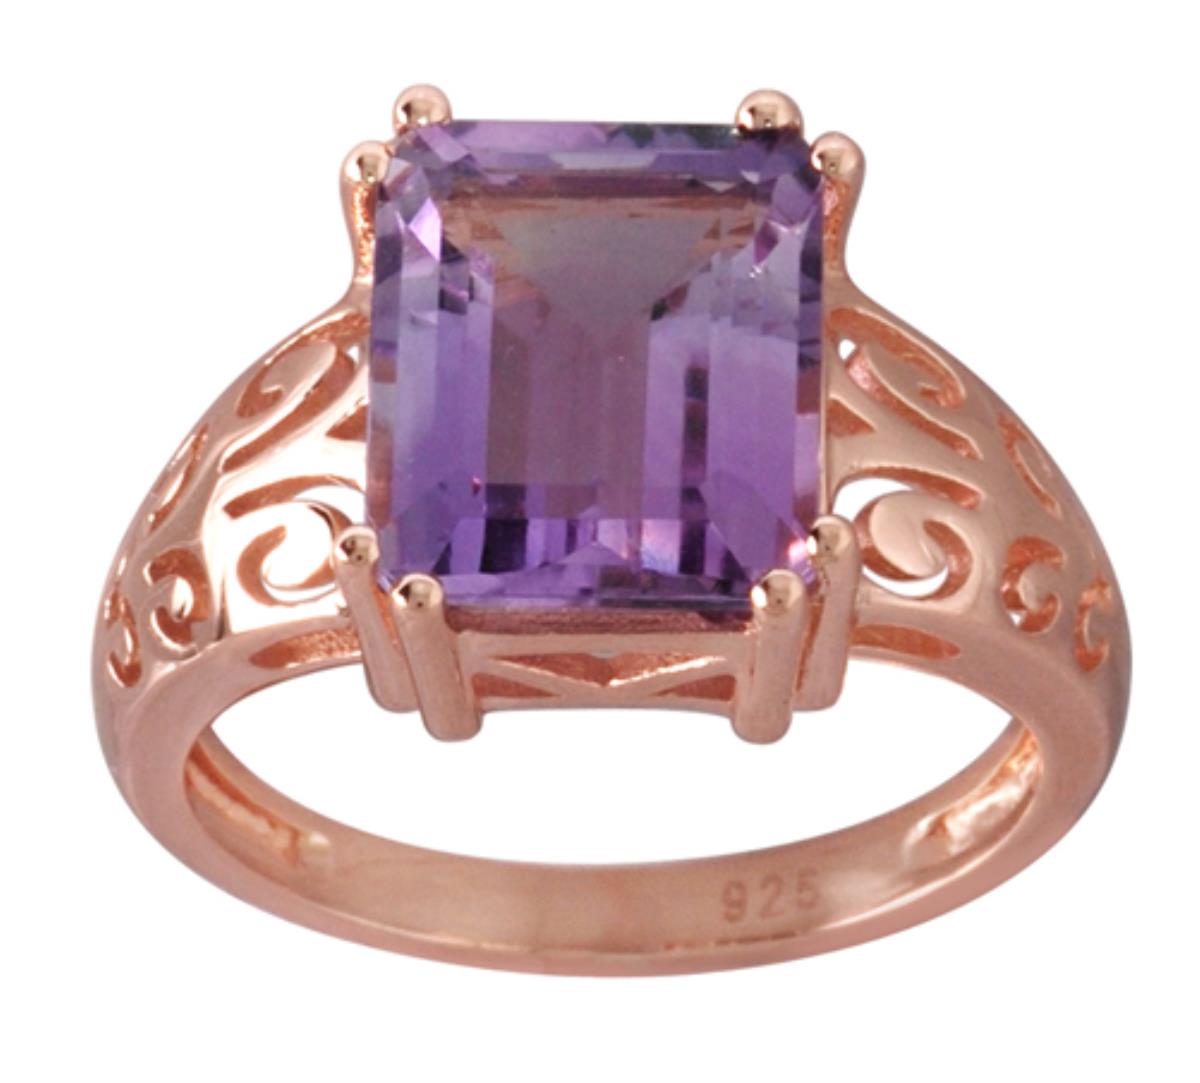 10K Rose Gold 11x9mm Emerald Cut Pink Amethyst Filigree Sides Solitaire Ring